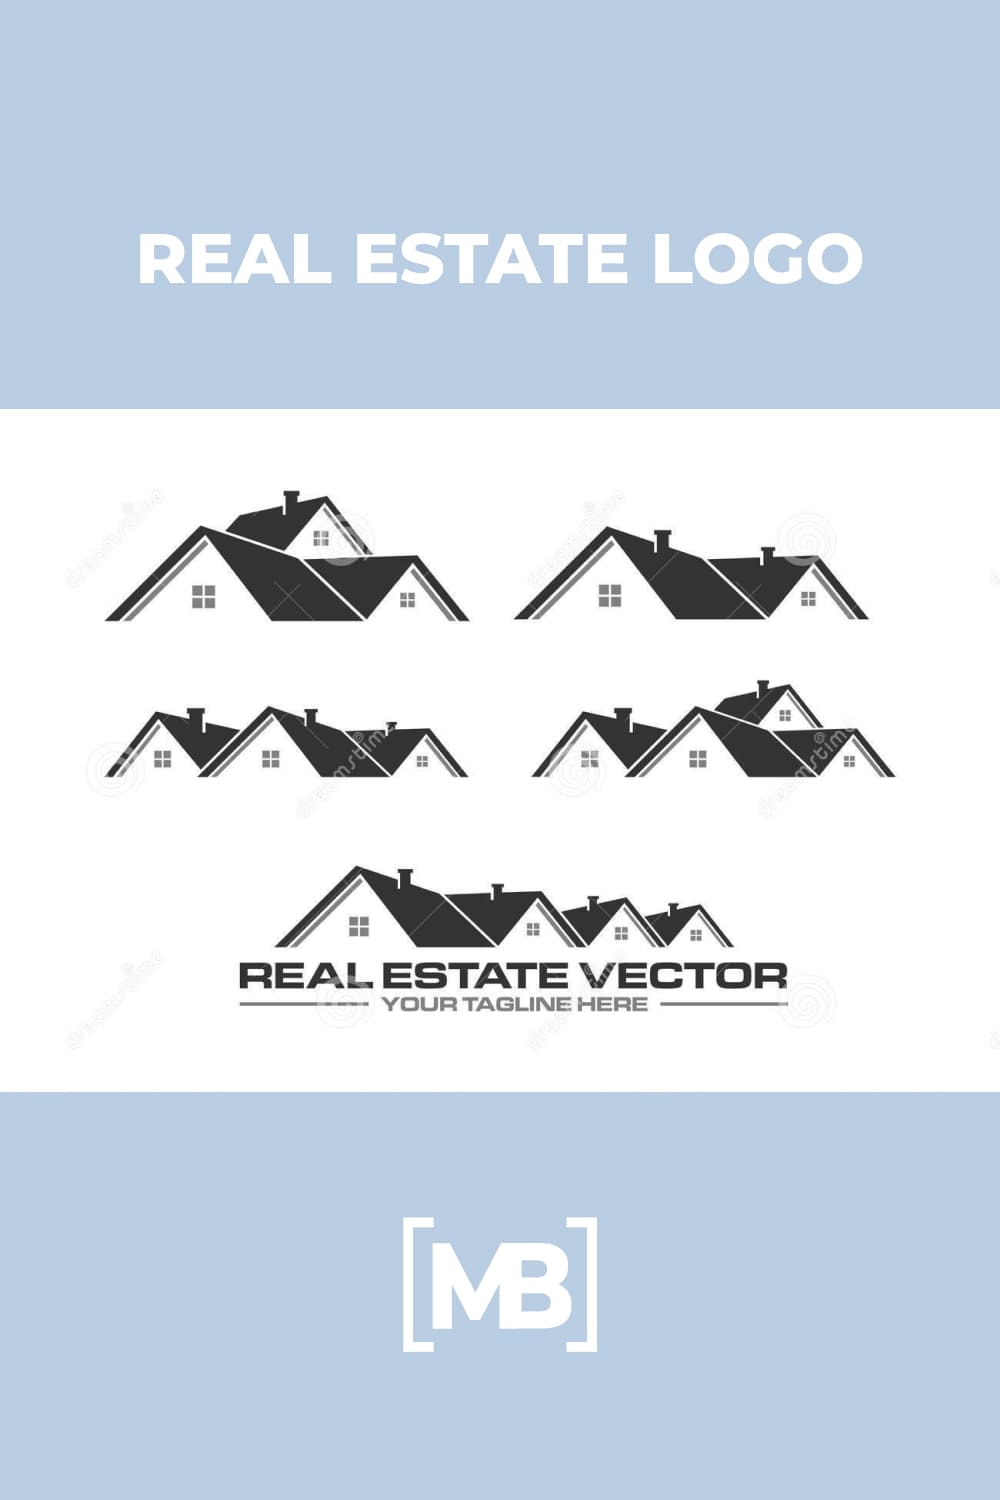 A simple roofing vector is ready for your Real Estate logo.